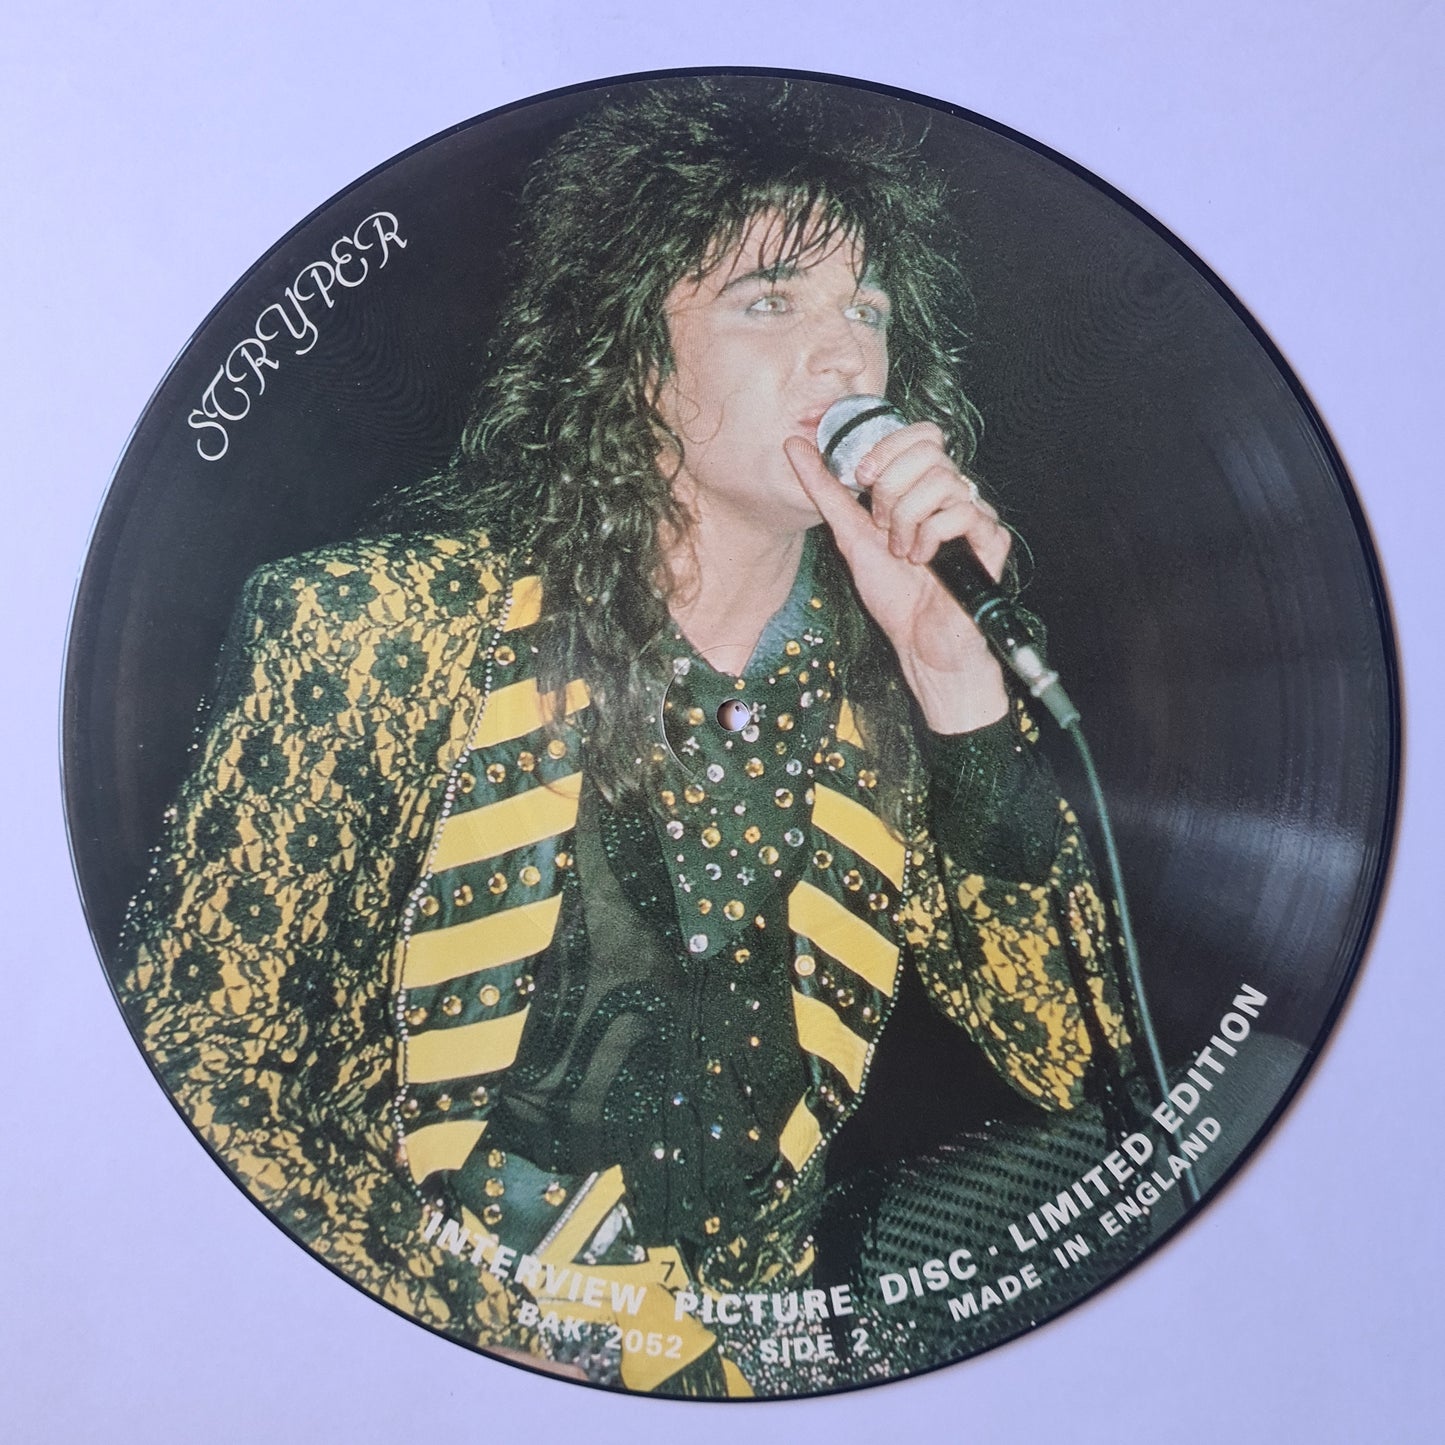 Stryper – Interview Picture Disc: Limited Edition Made In England - 1980's - Vinyl Record